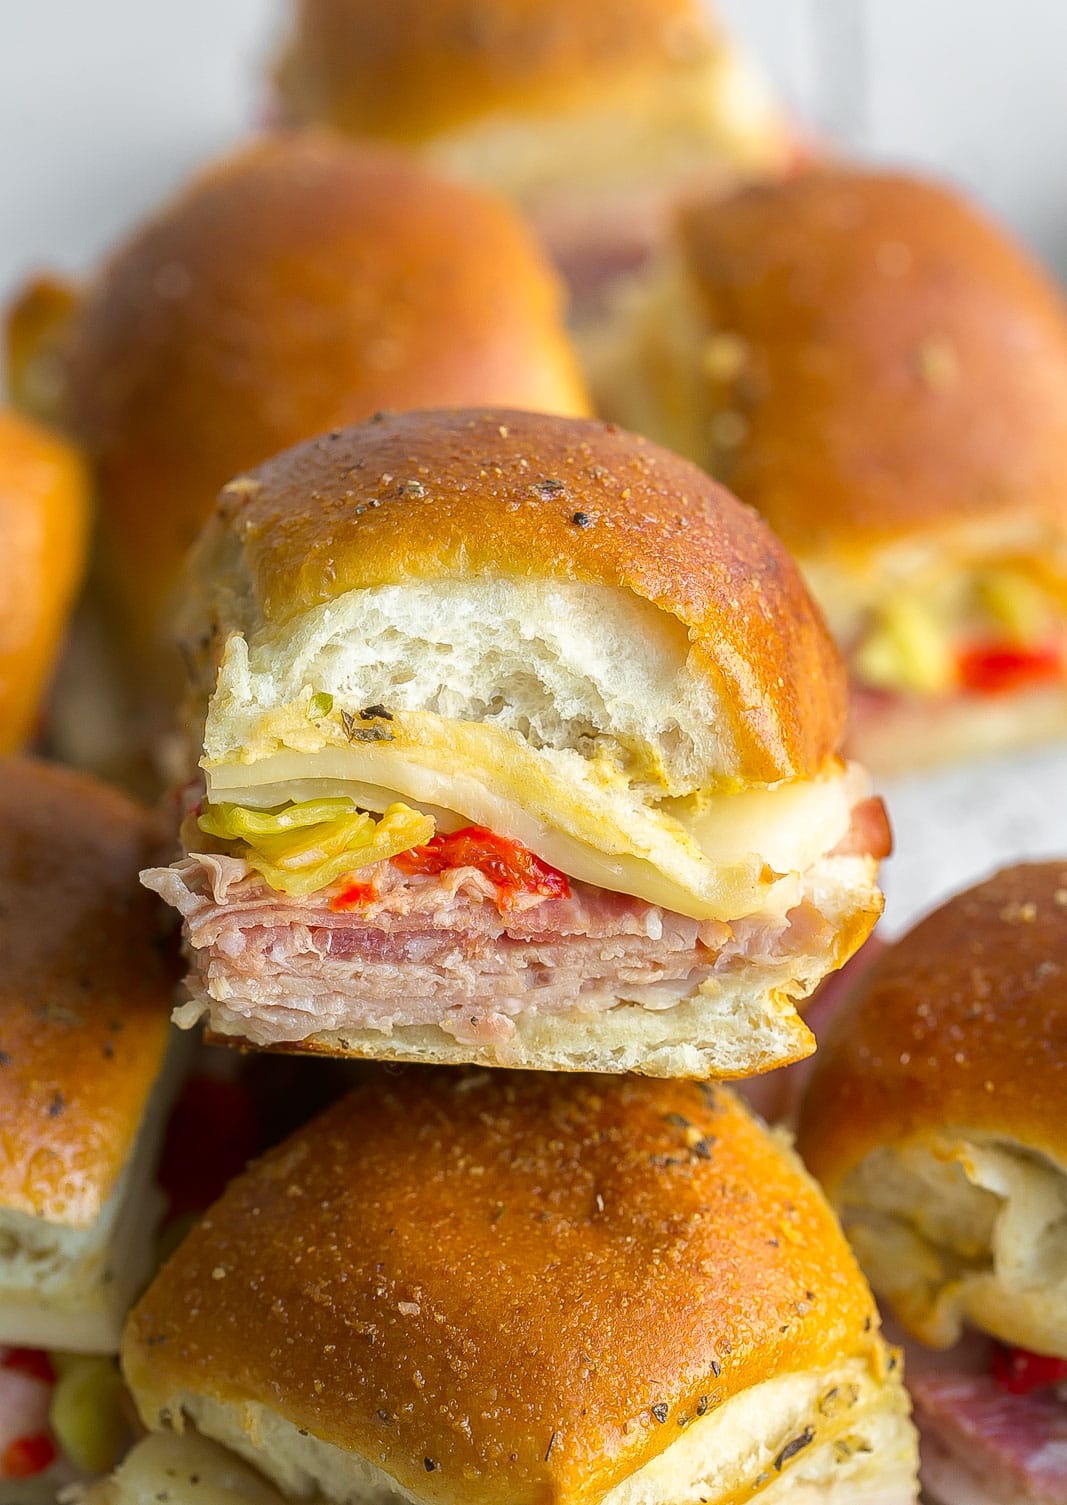 Bread rolls stuffed with meats and cheese. 